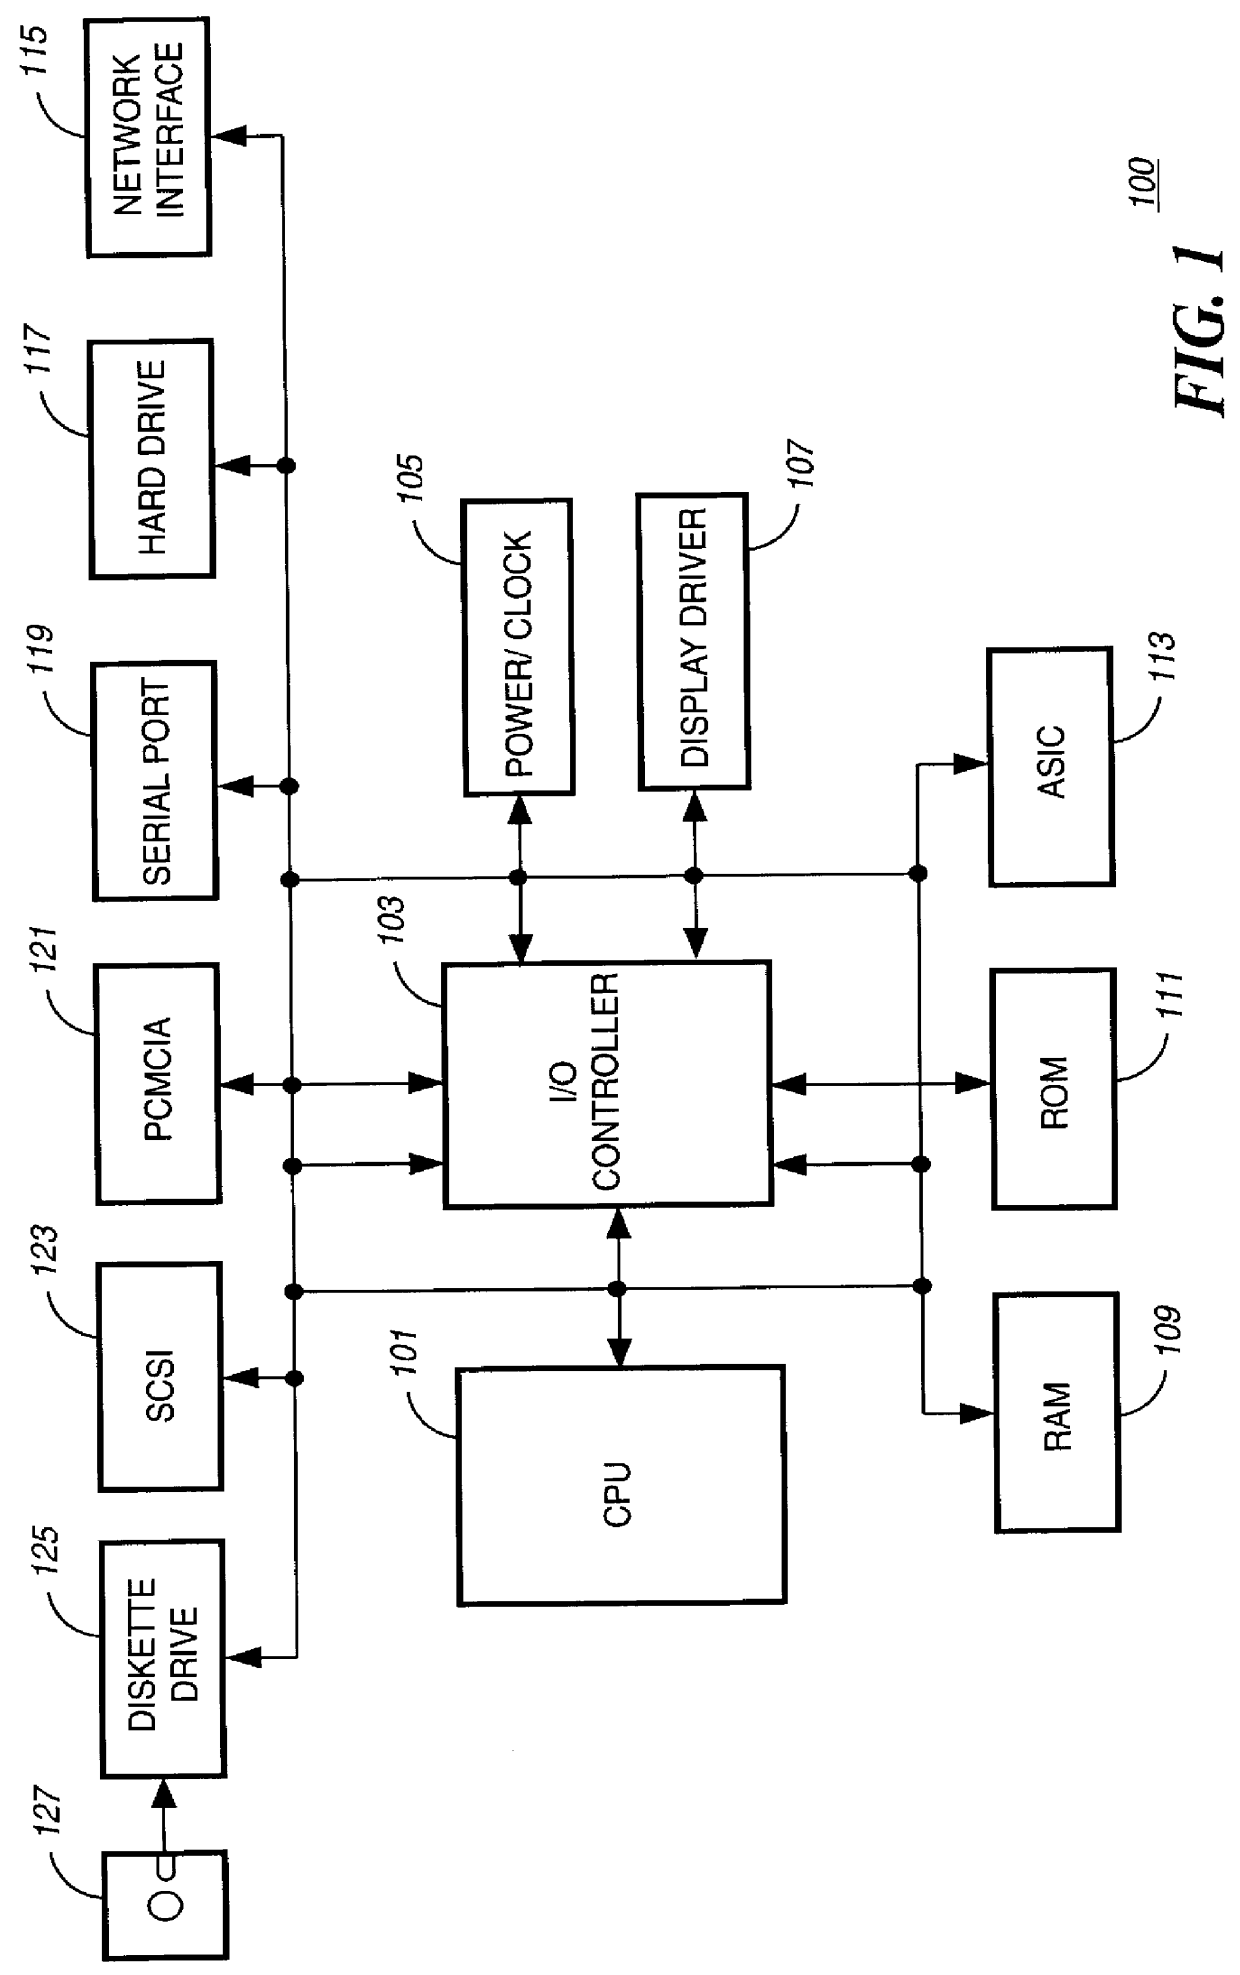 Thermal monitoring system for semiconductor devices